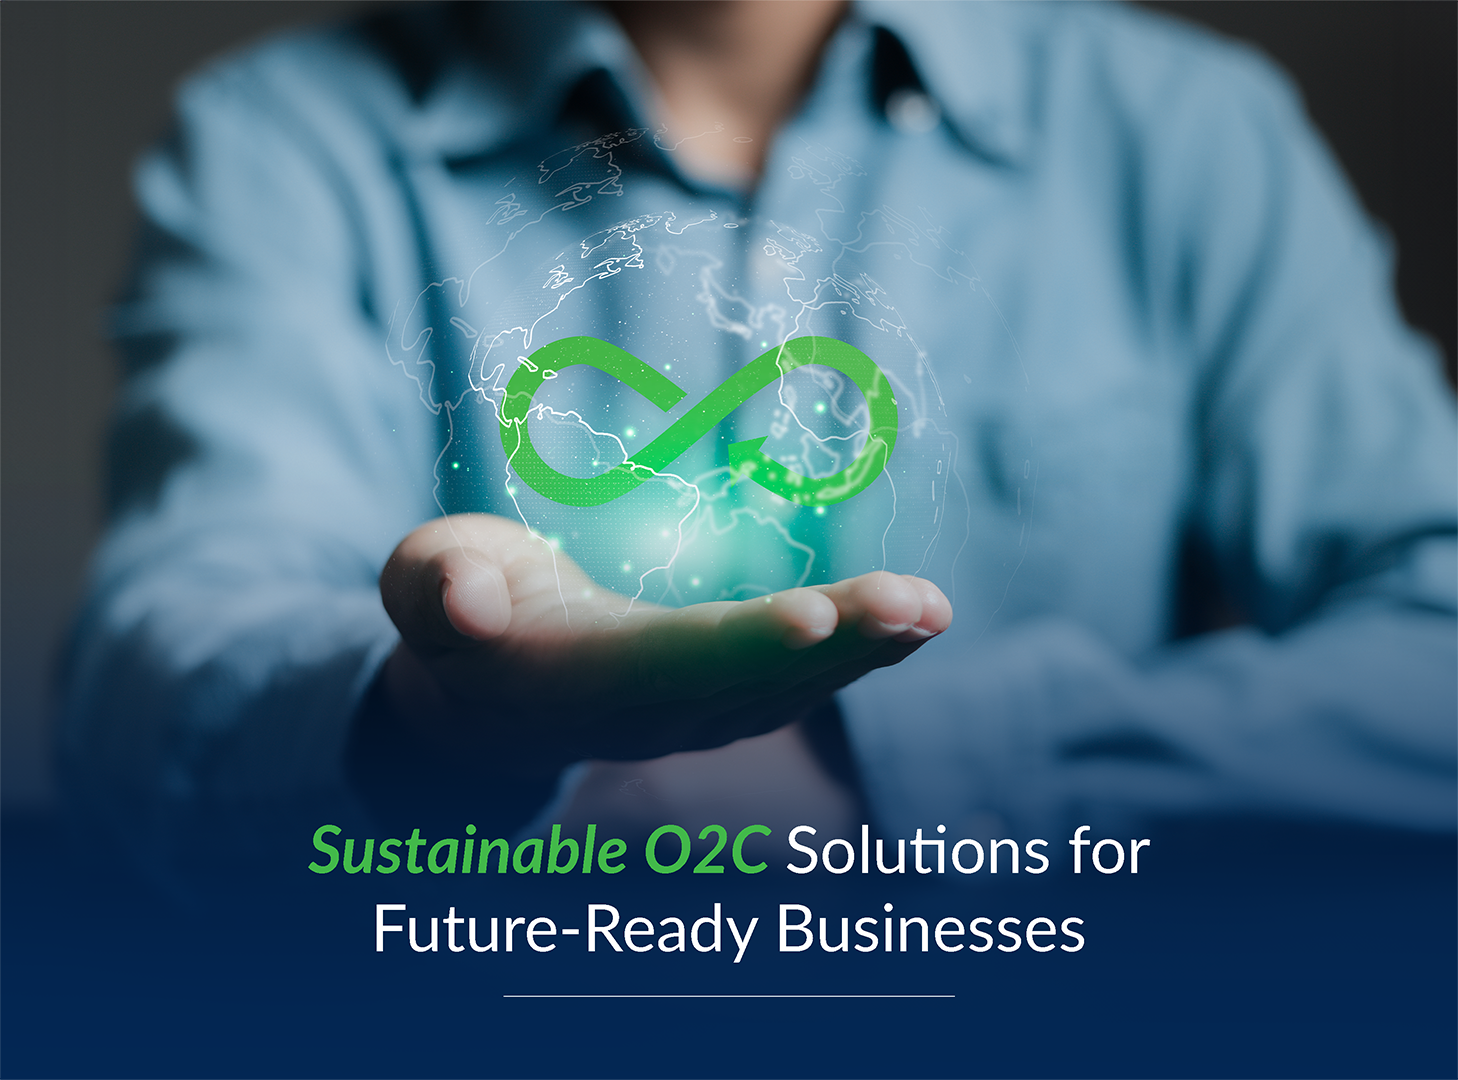 5 Sustainable O2C Solutions for Future-Ready Businesses